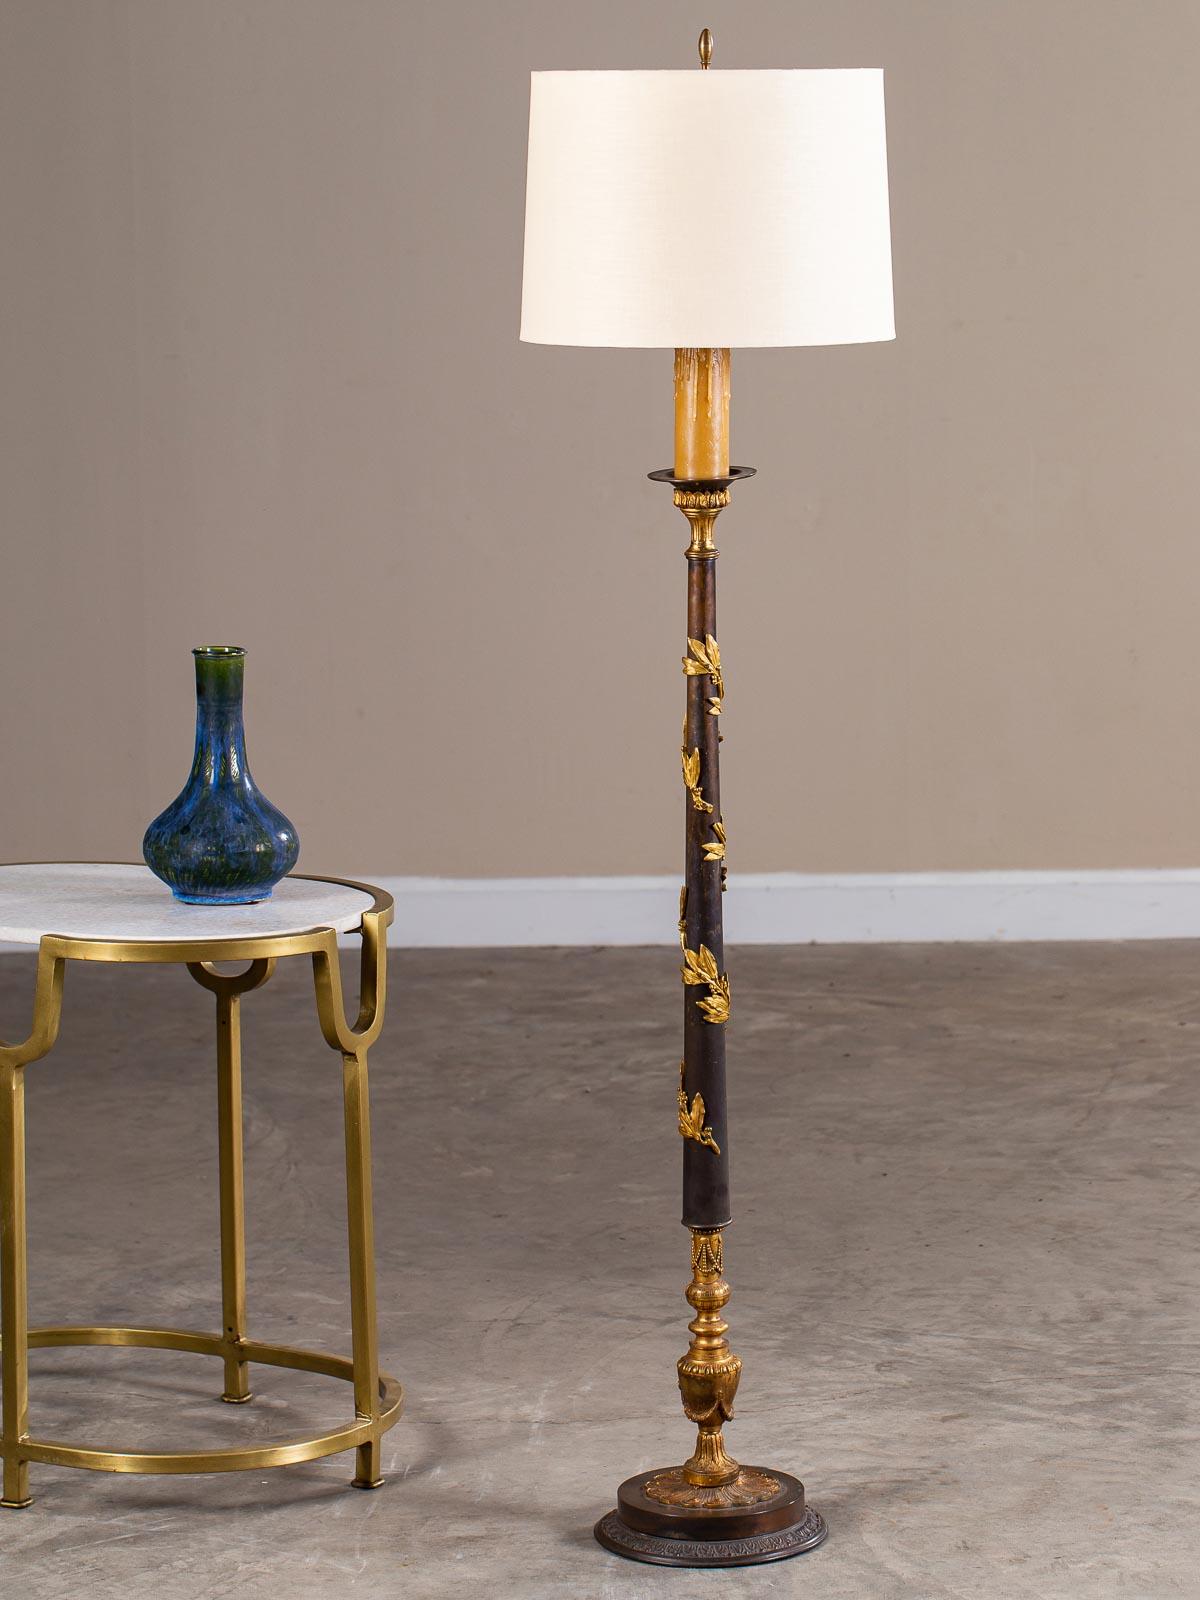 An elegant neoclassical antique French bronze and gilt bronze floor lamp, circa 1900 now wired for American electricity. The marvelous circular bronze base supports a symmetrical vase adorned with draped beads in gilt bronze which then supports a